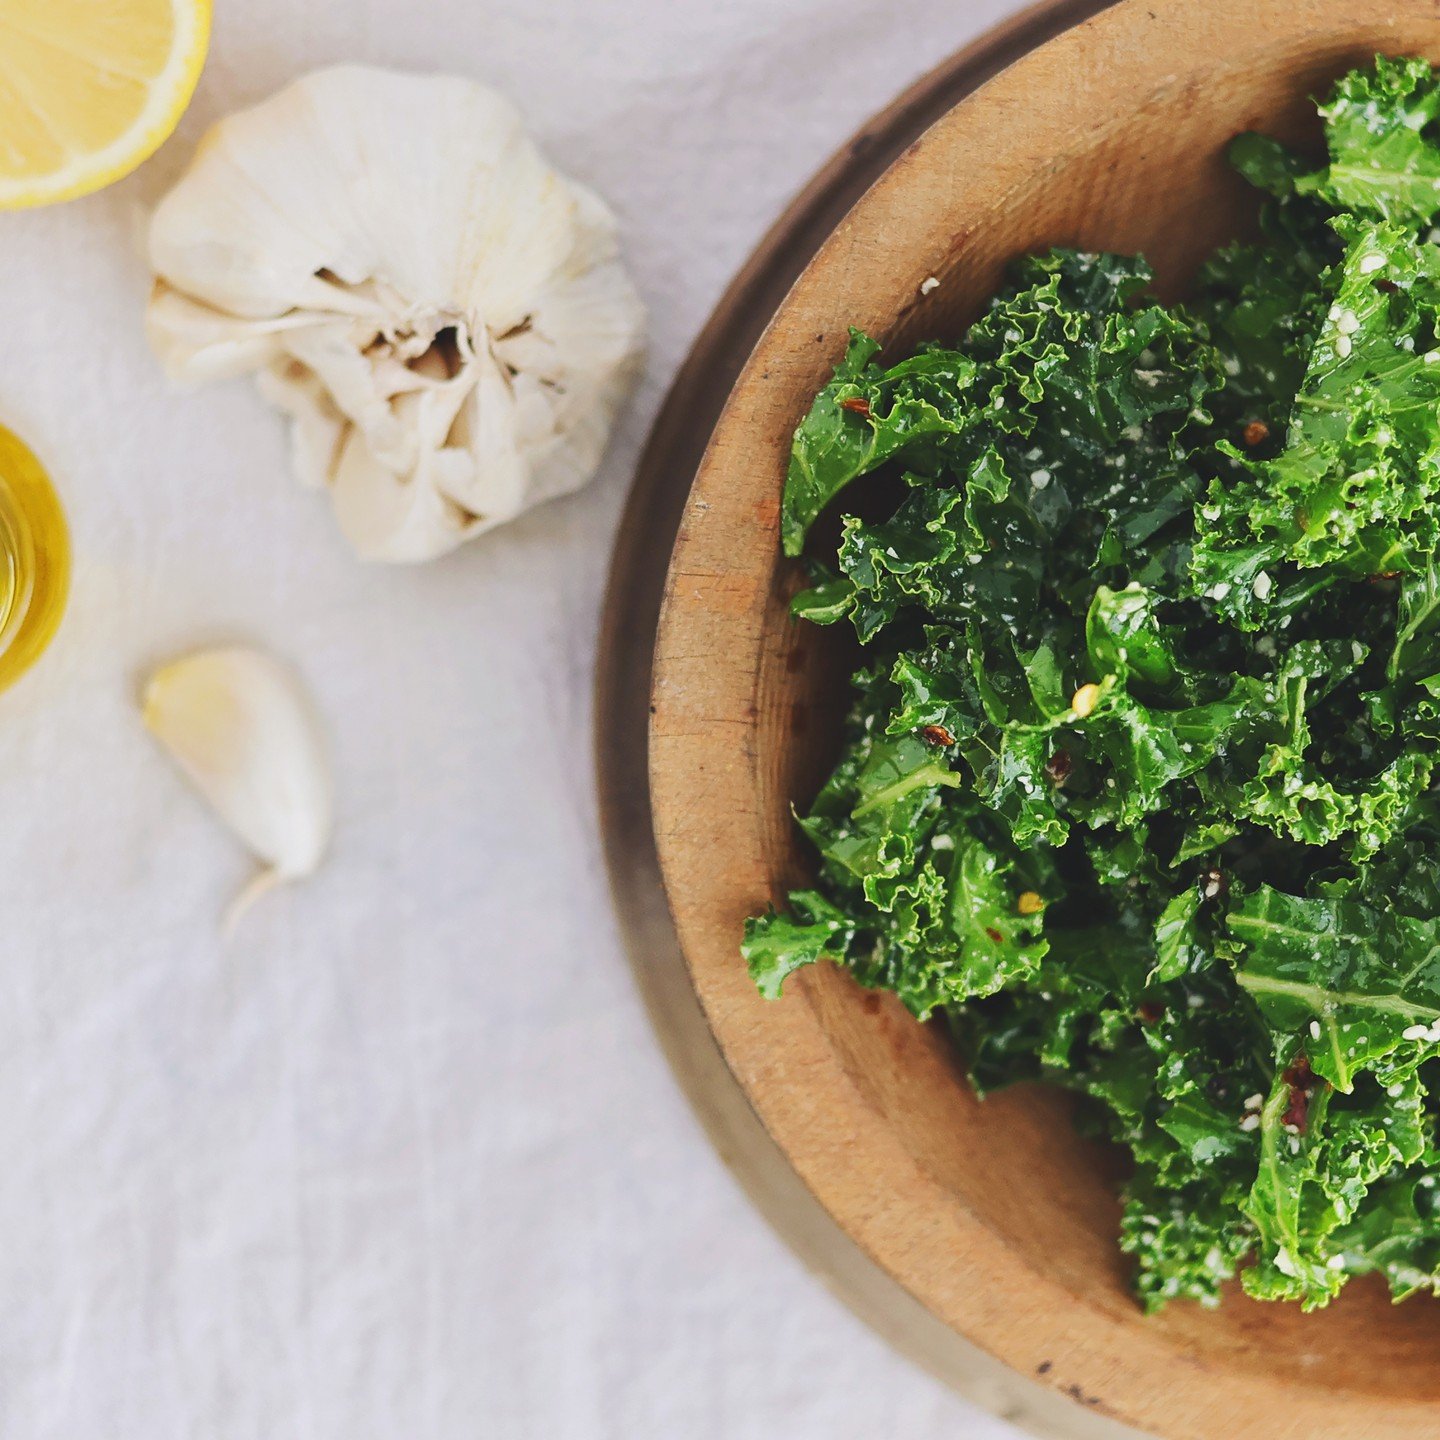 Although we think every season is salad season, spring is a perfect time to eat more salads!🥗 Check out our fave simple Kale with Parm Vin recipe on the Blog.😋 
.
.
.
#o44 #o44method #o44recipes #o44blog